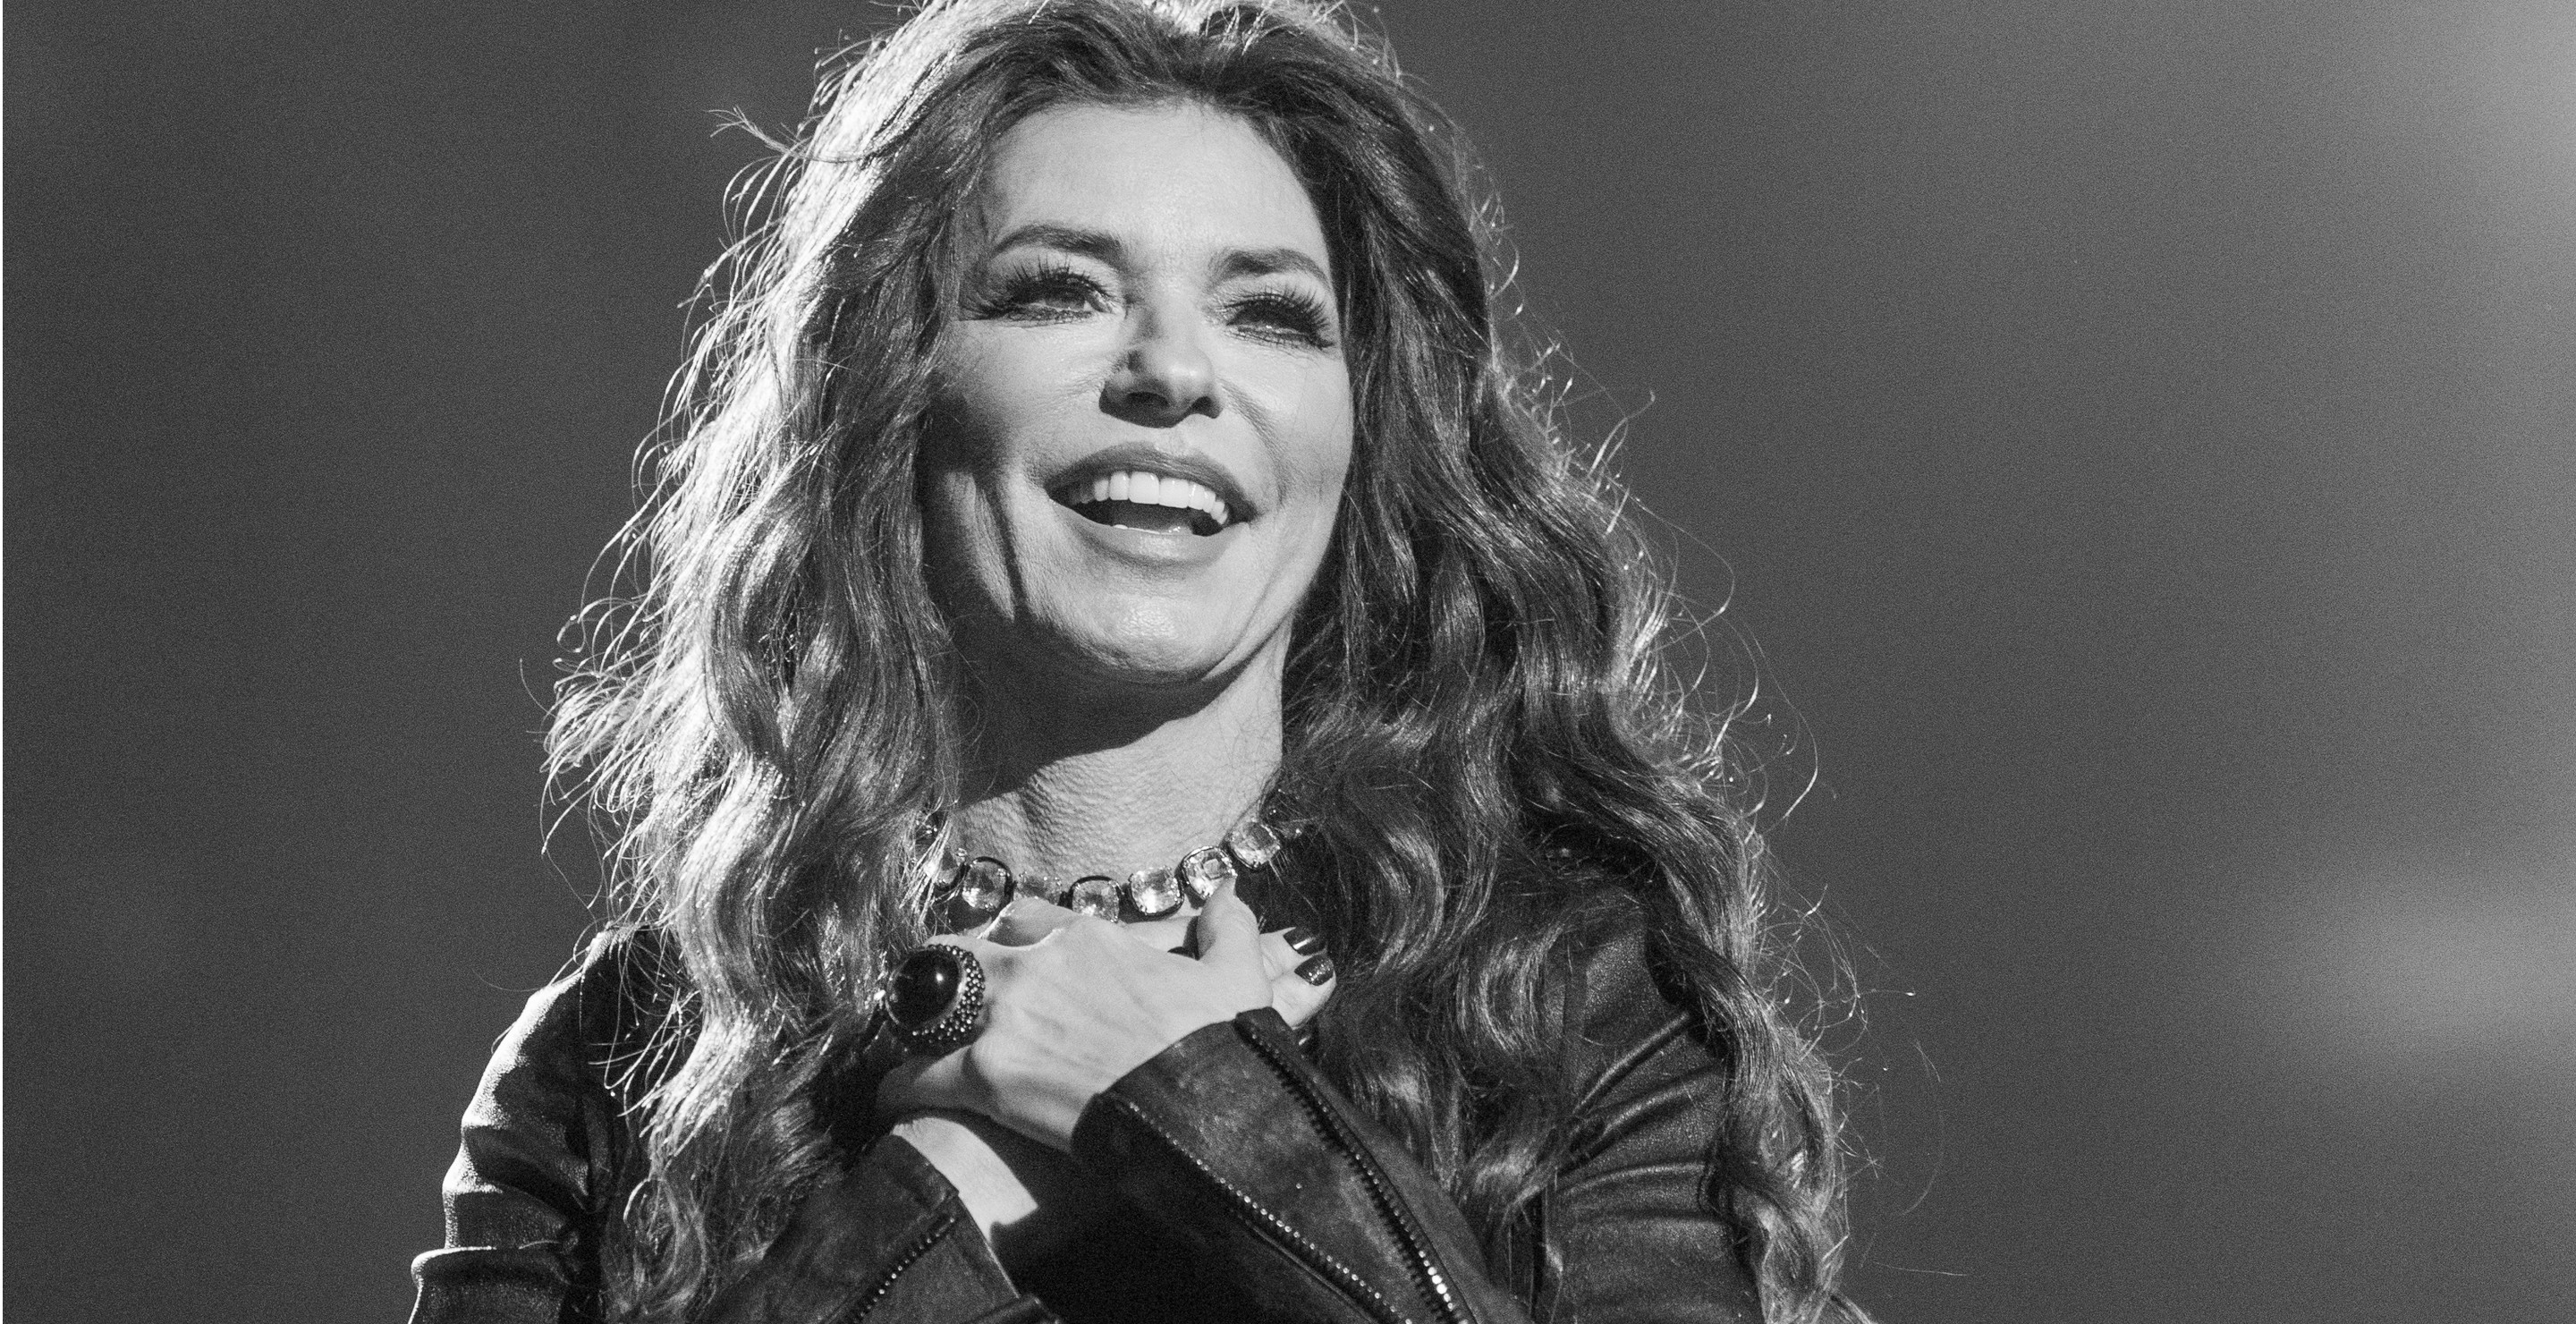 Shania Twain Details How She Lost Her Virginity At 15 To Concert Crowd